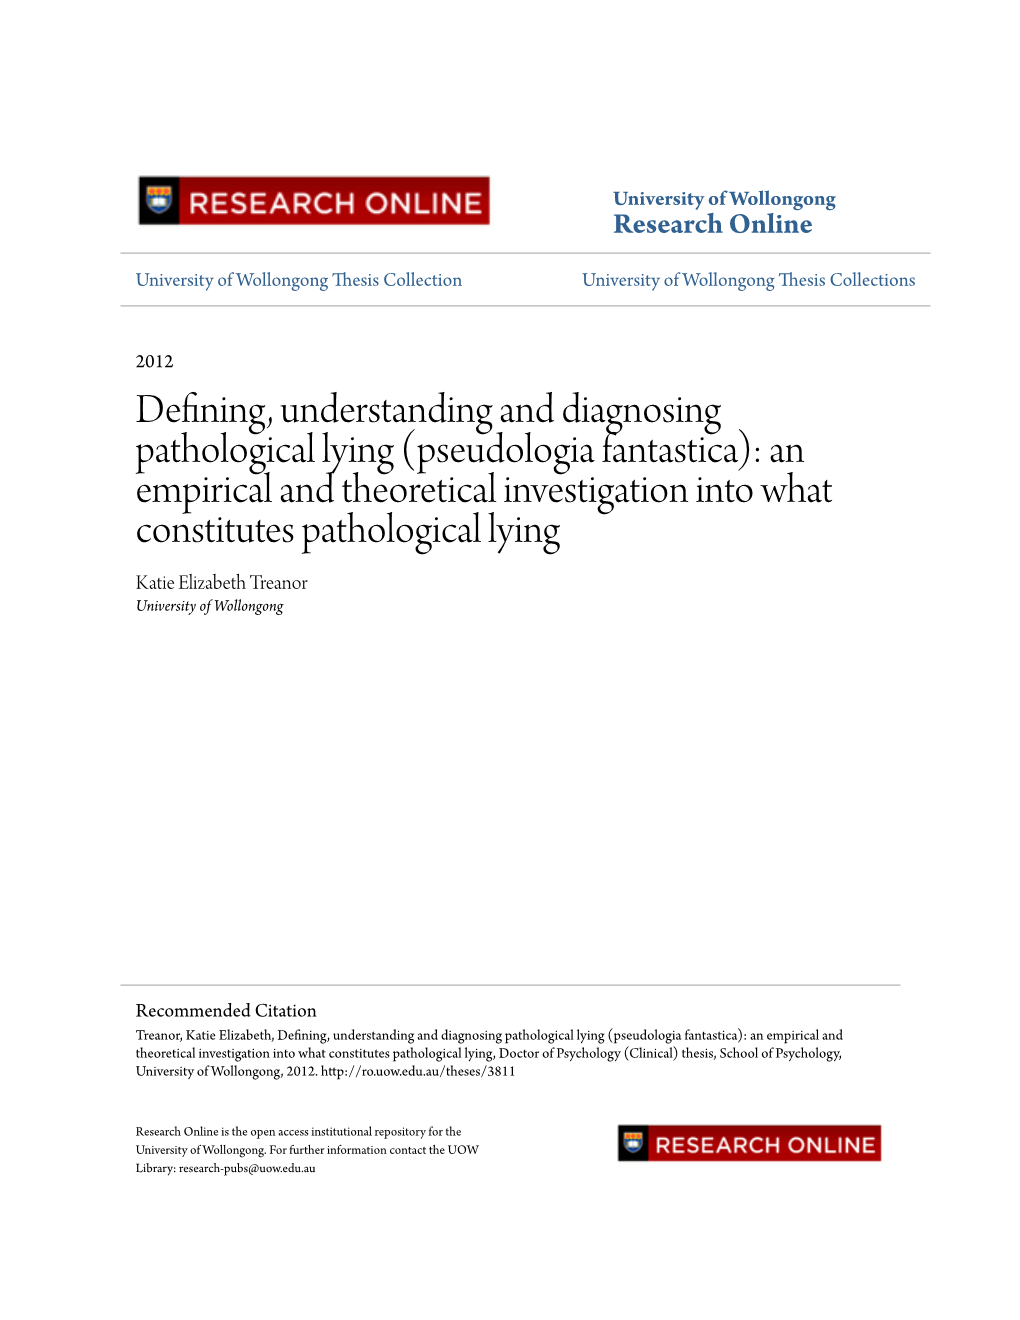 Defining, Understanding and Diagnosing Pathological Lying (Pseudologia Fantastica): an Empirical and Theoretical Investigation I